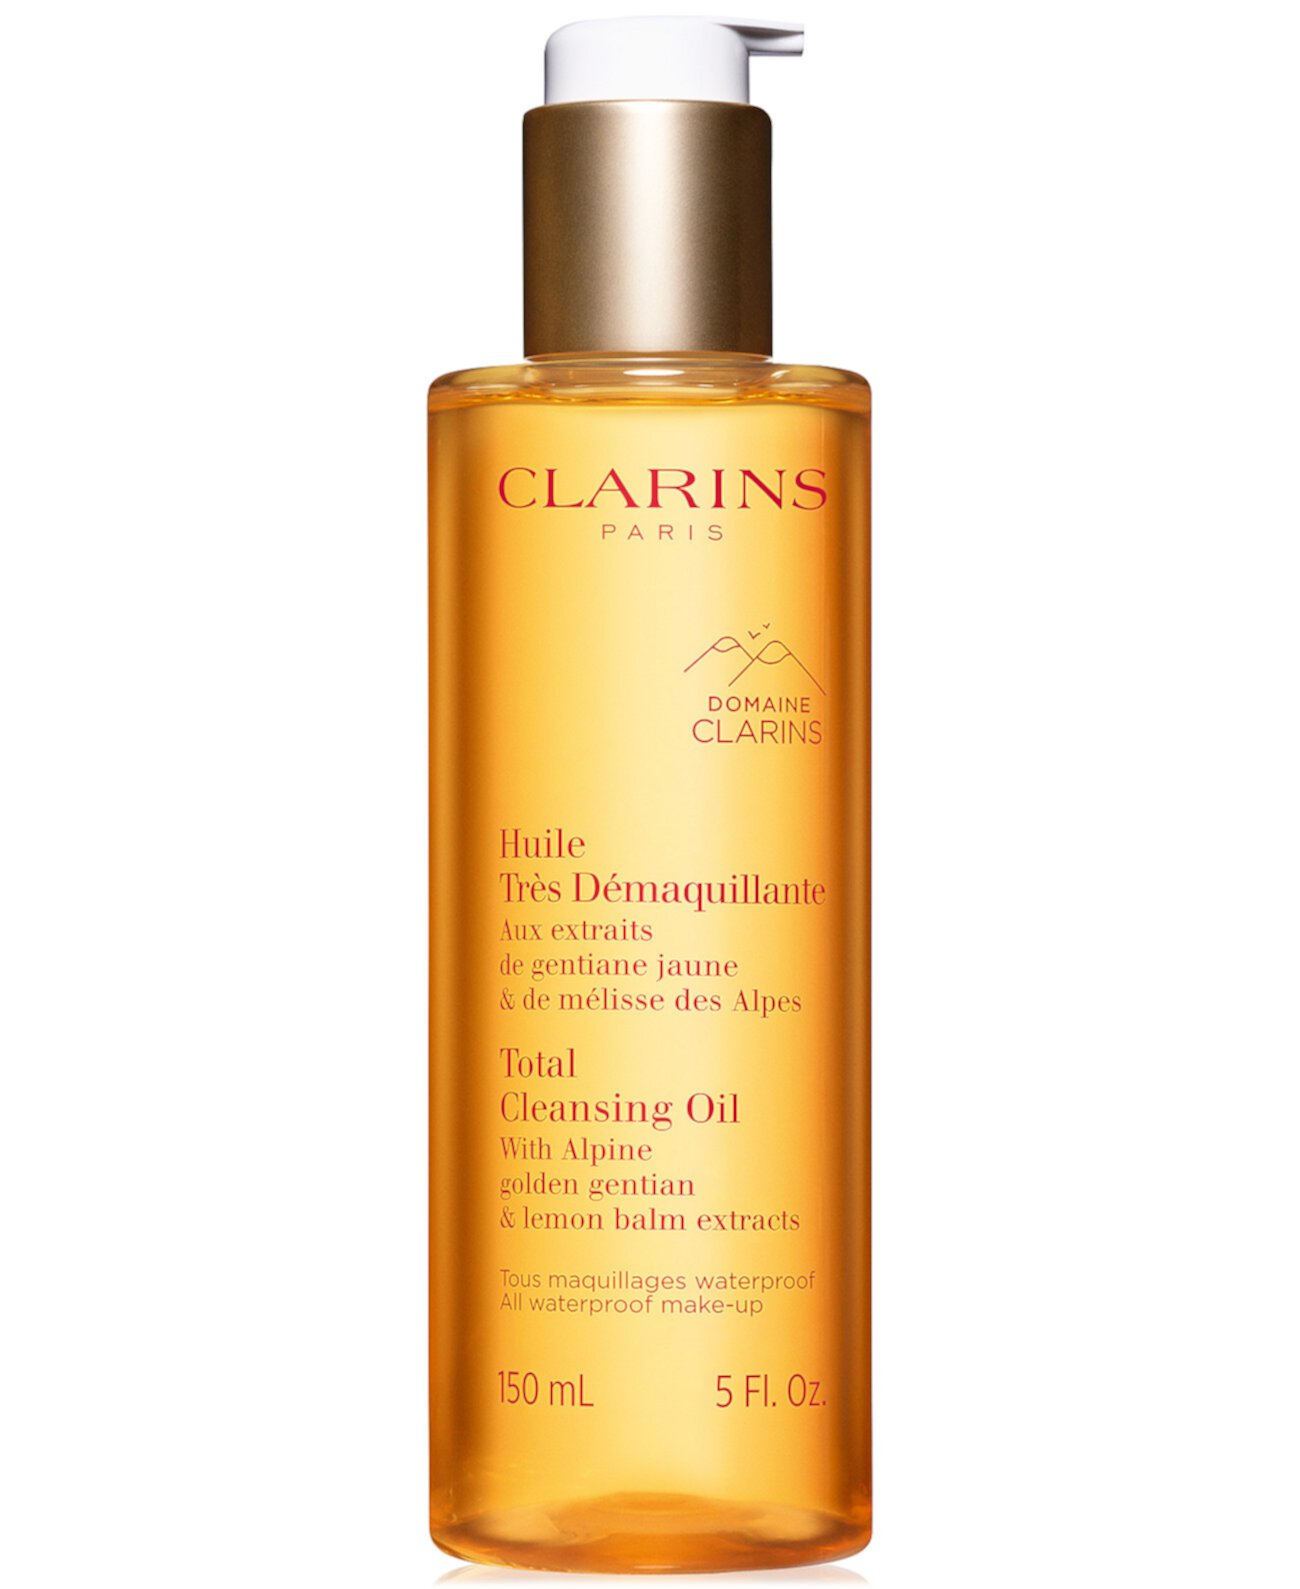 Total Cleansing Oil & Makeup Remover, 5 oz. Clarins